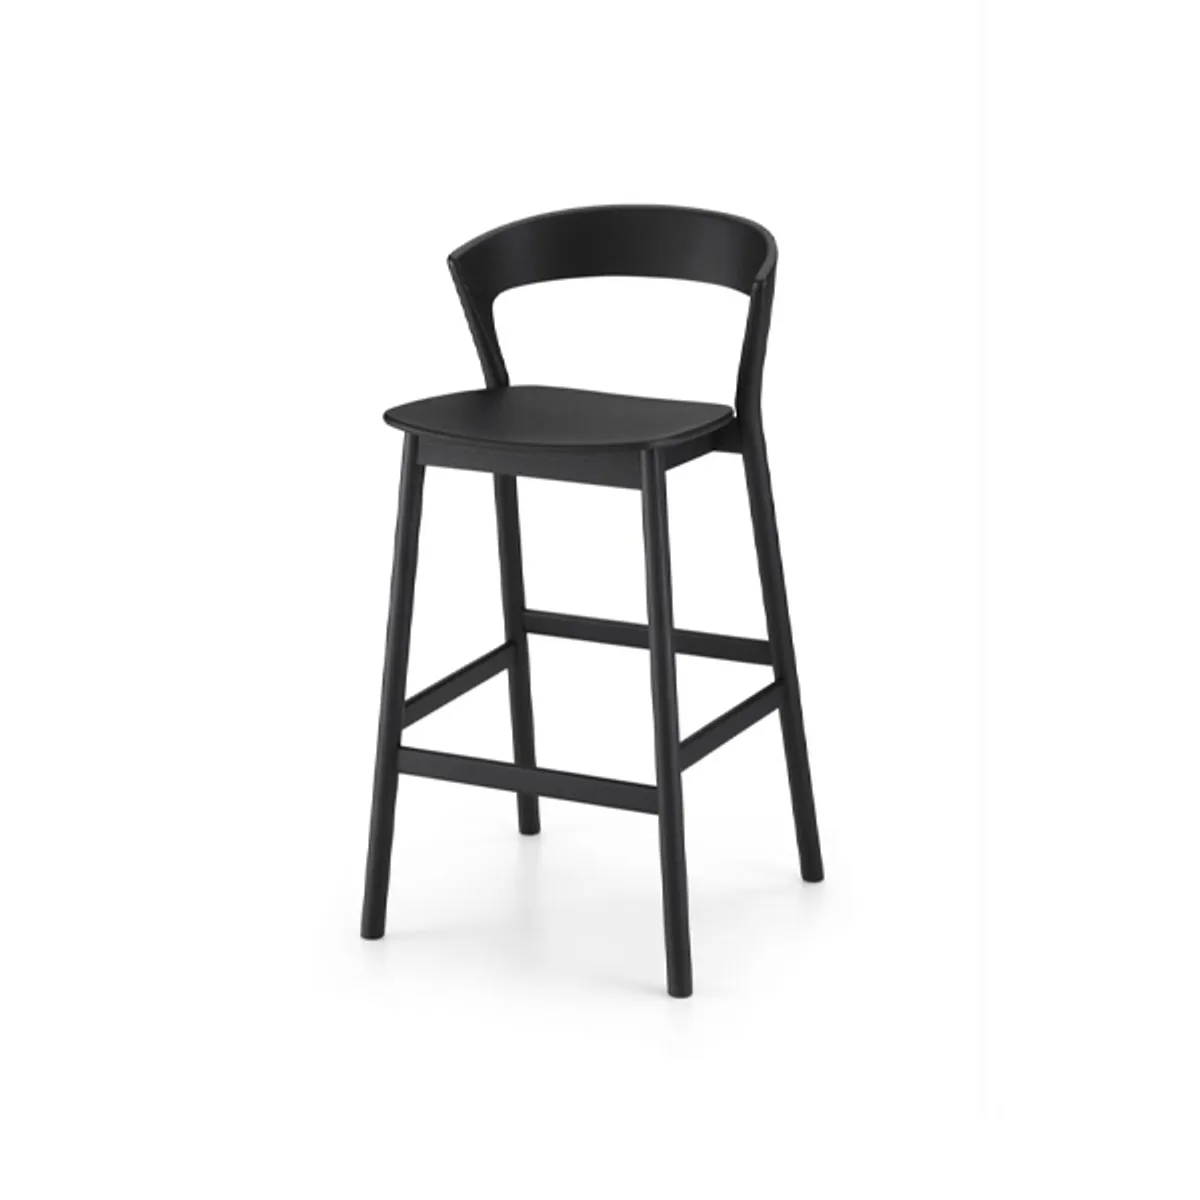 Thora wood bar stool Inside Out Contracts2